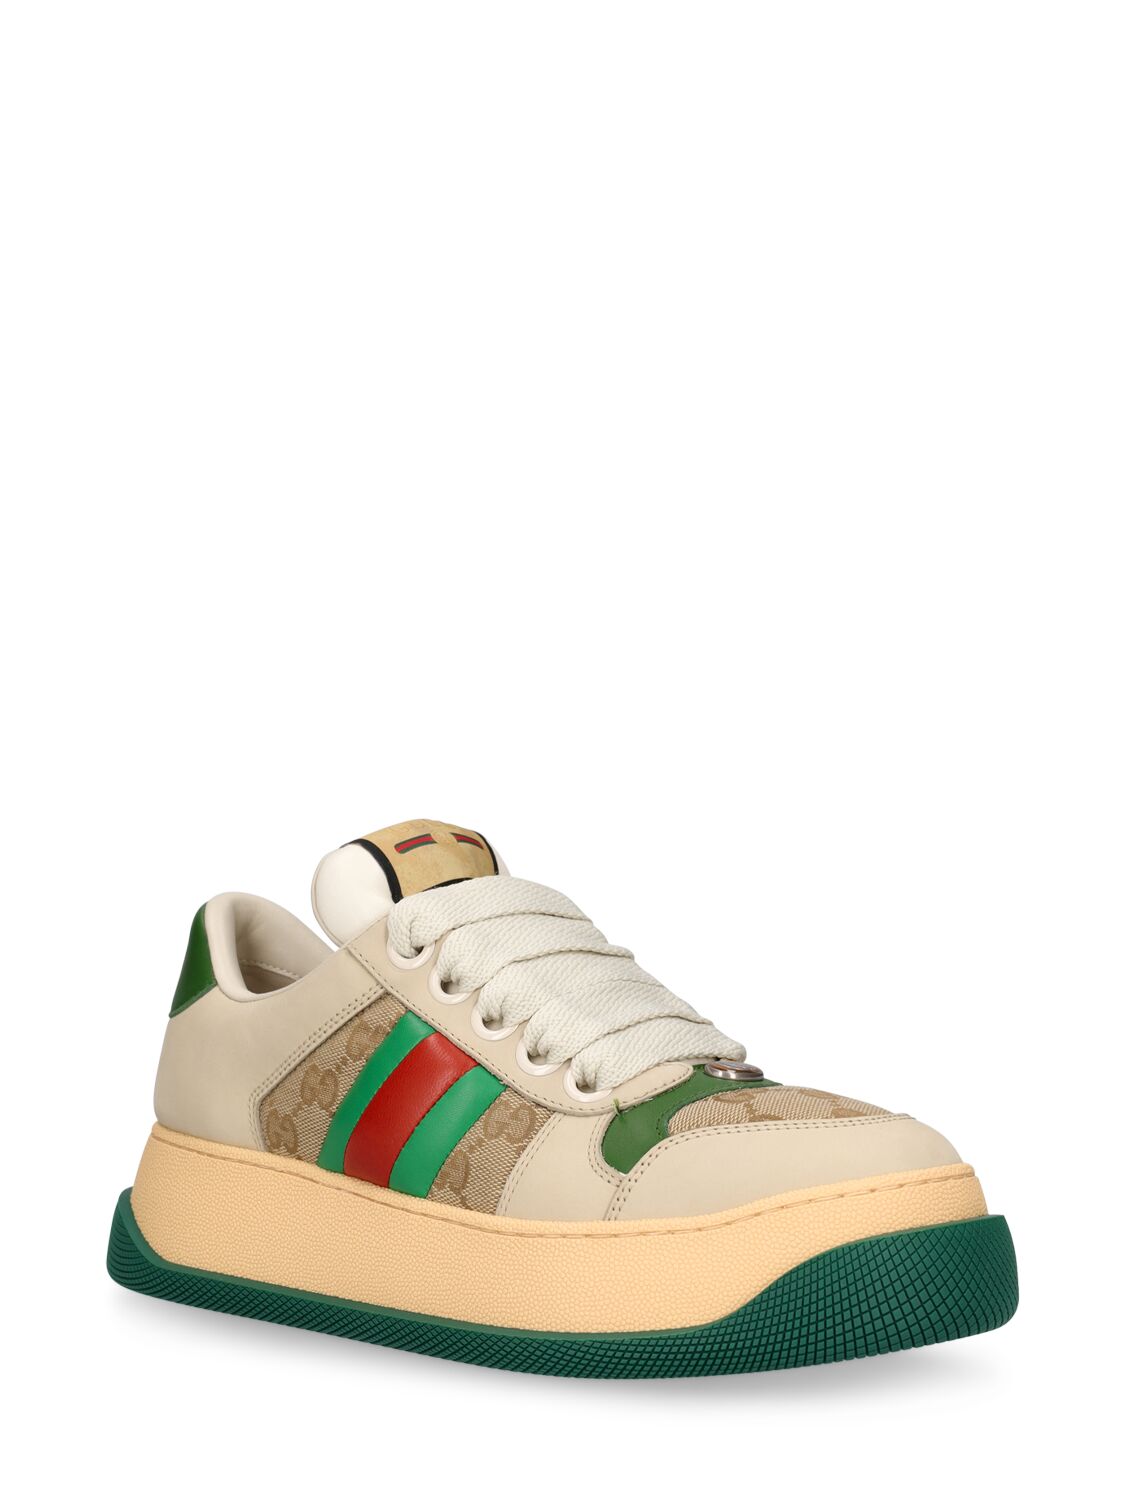 Shop Gucci 50mm Screener Leather Sneakers W/ Web In White,green